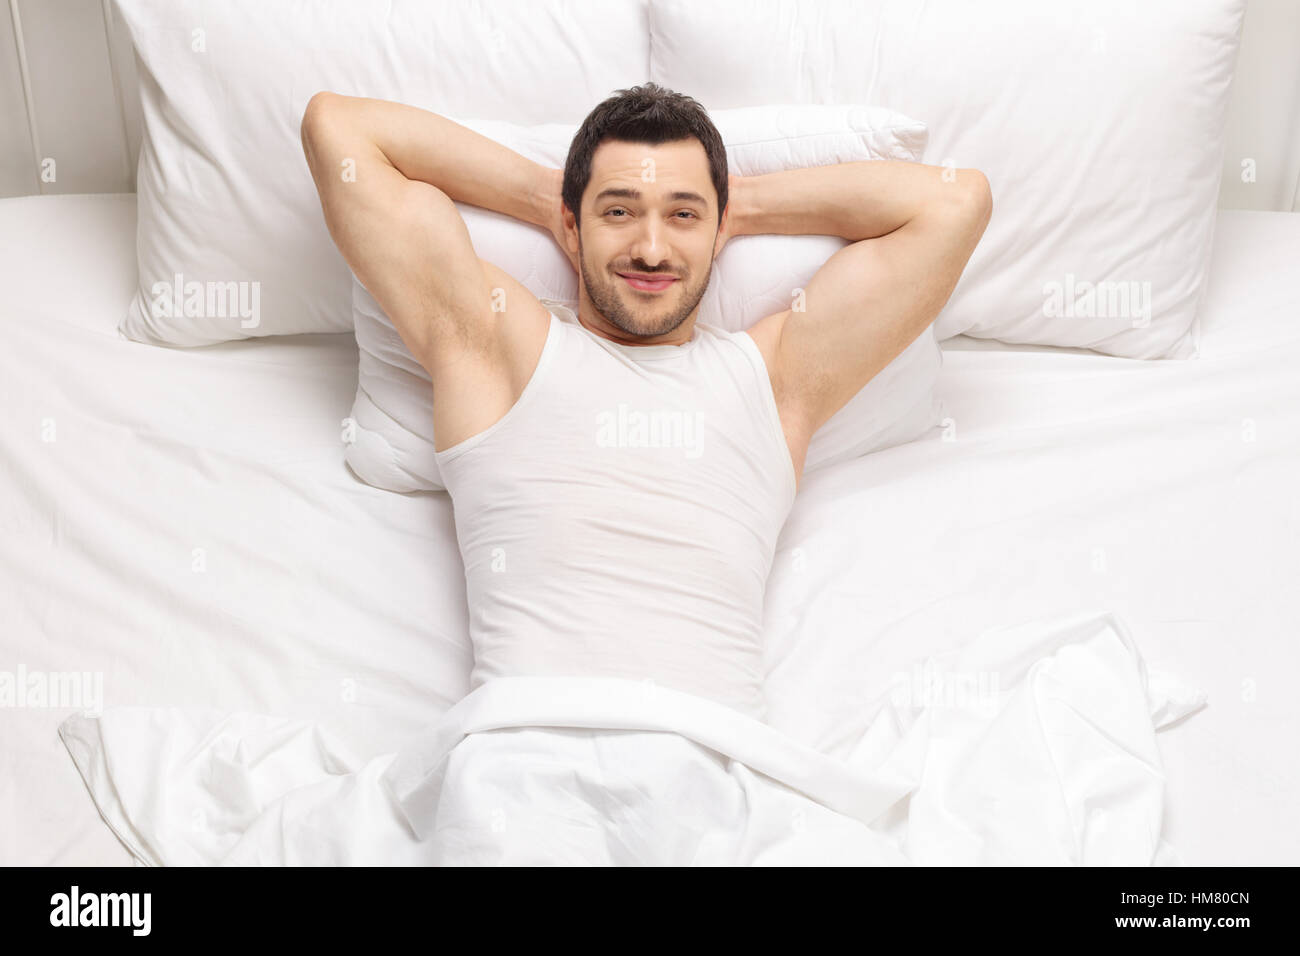 Handsome man lying in bed and looking at the camera Stock Photo